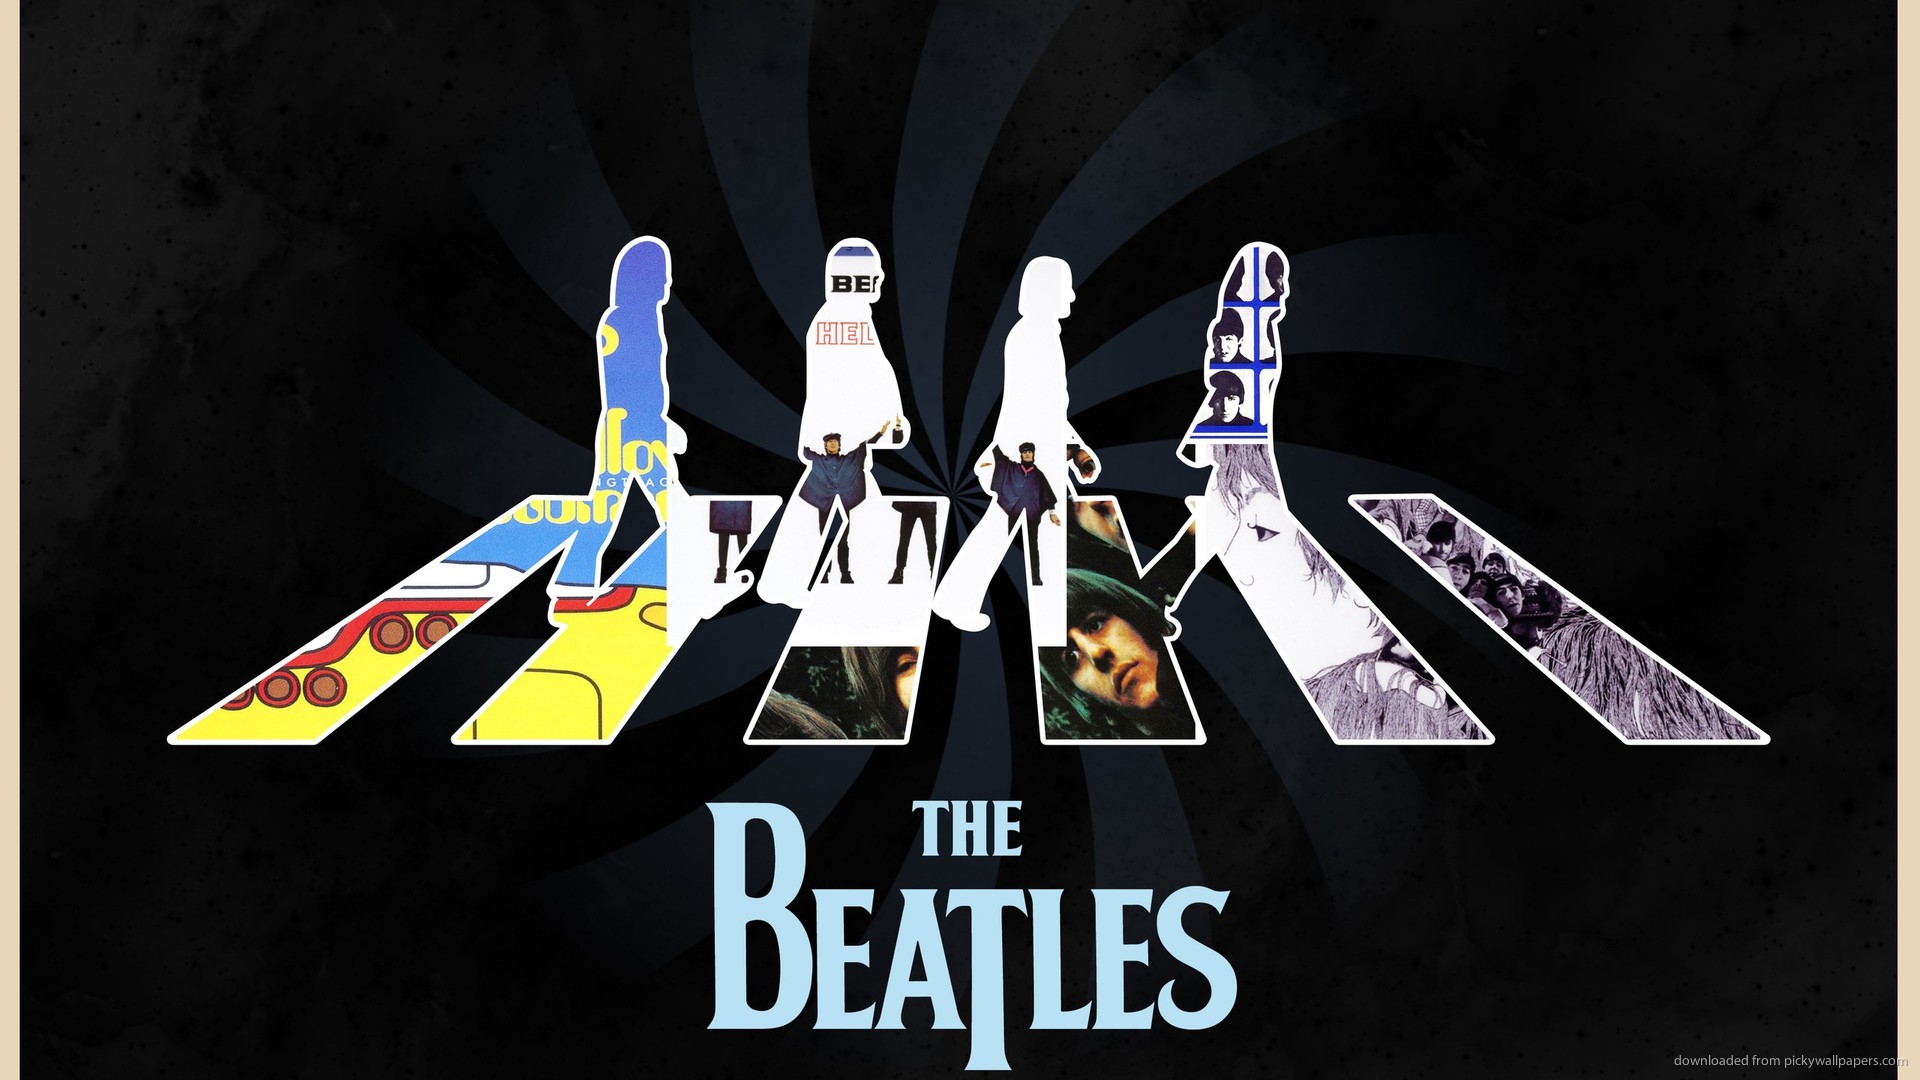 Download 1920x1080 The Beatles Abbey Road Album Covers Wallpaper